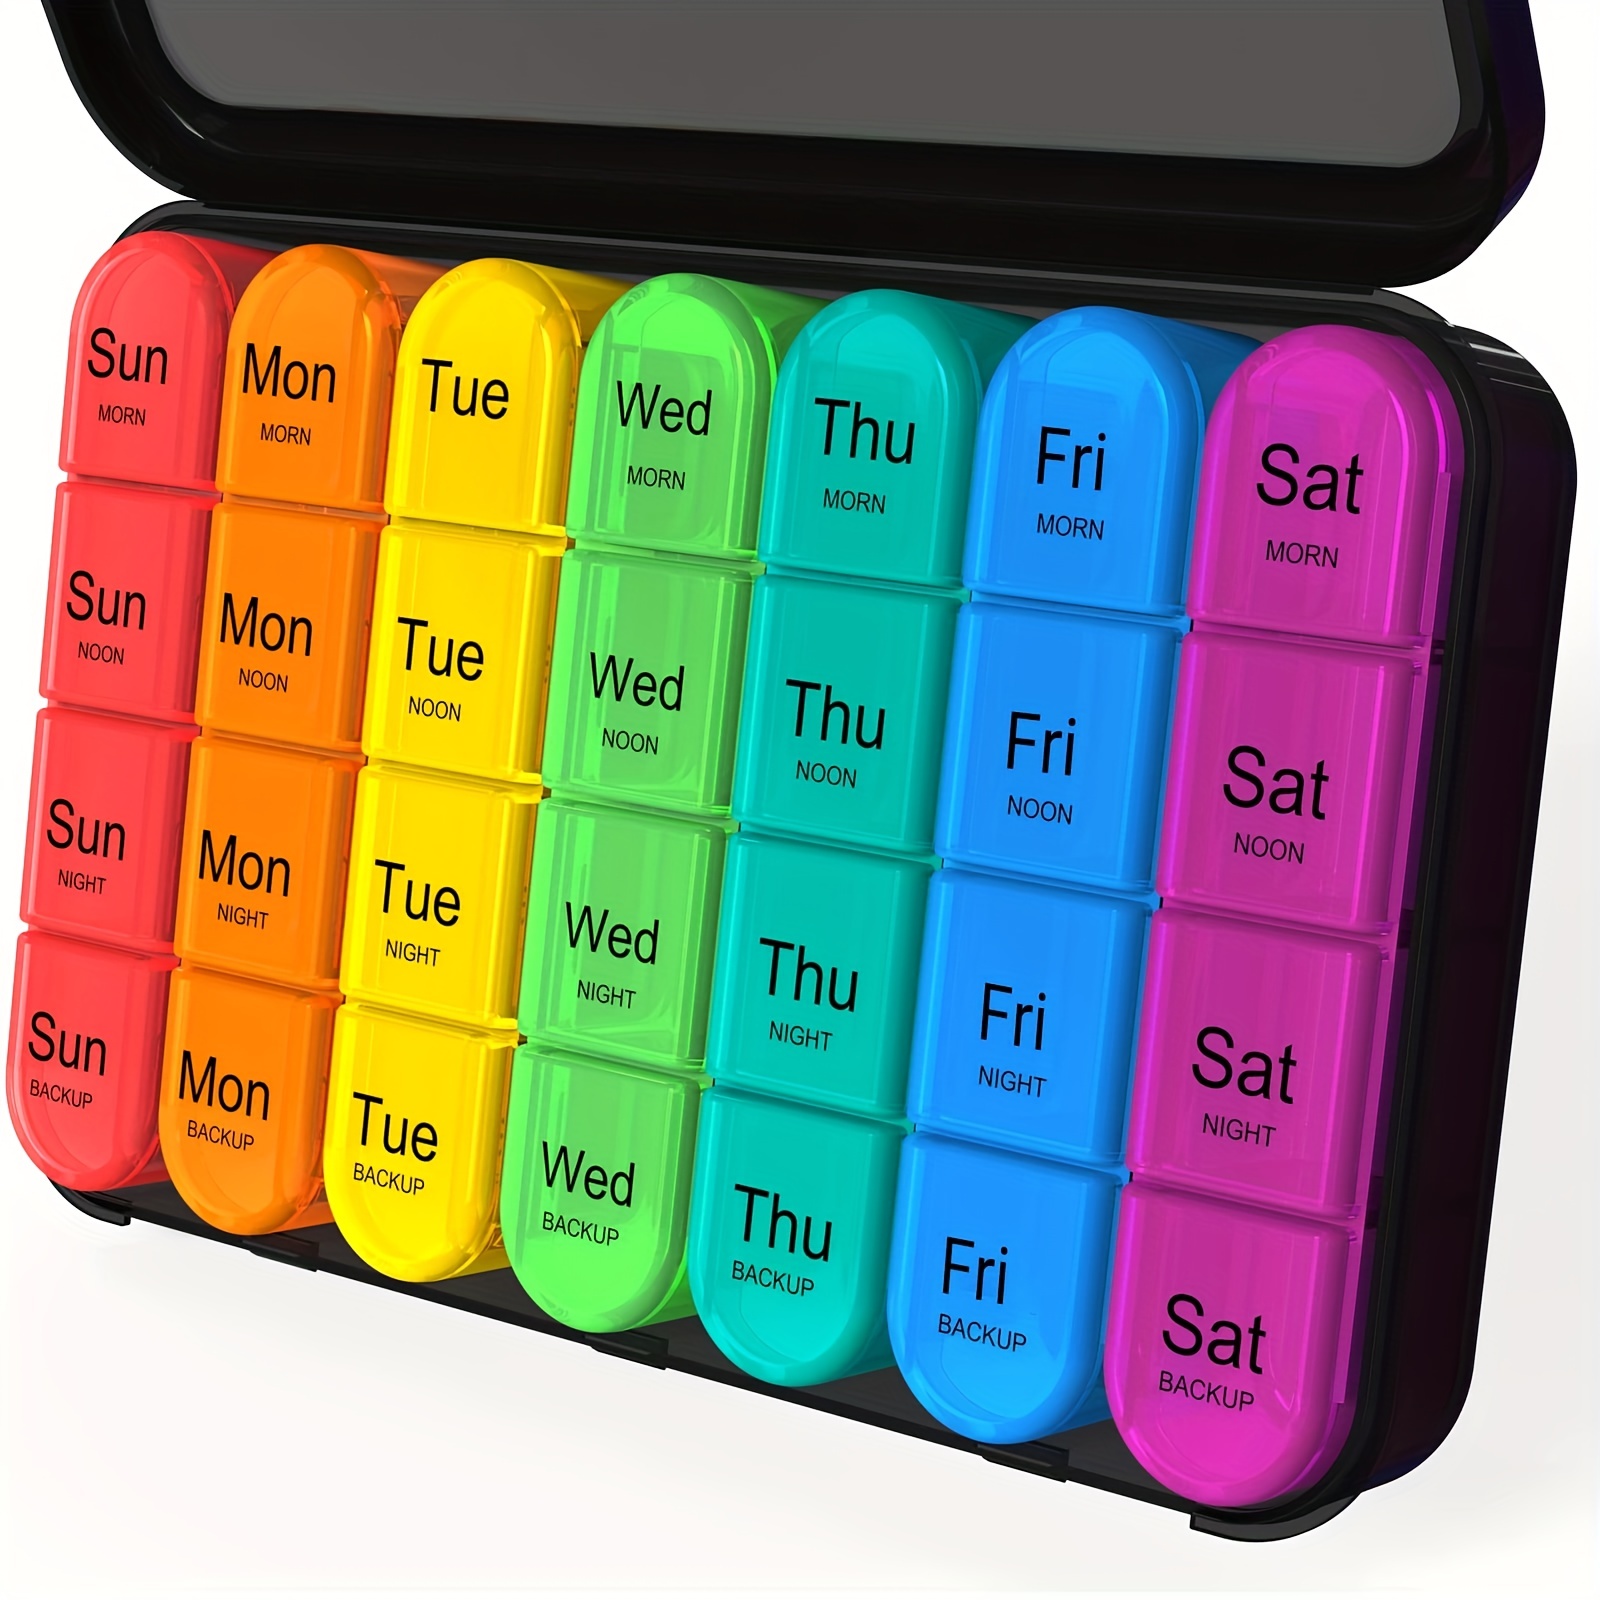 Daviky Weekly Pill Organizer, 7 Day Pill Organizer 4 Times A Day, Daily Pill Box 7 Day, Large Travel Pill Box with Removable Pill Case to Hold